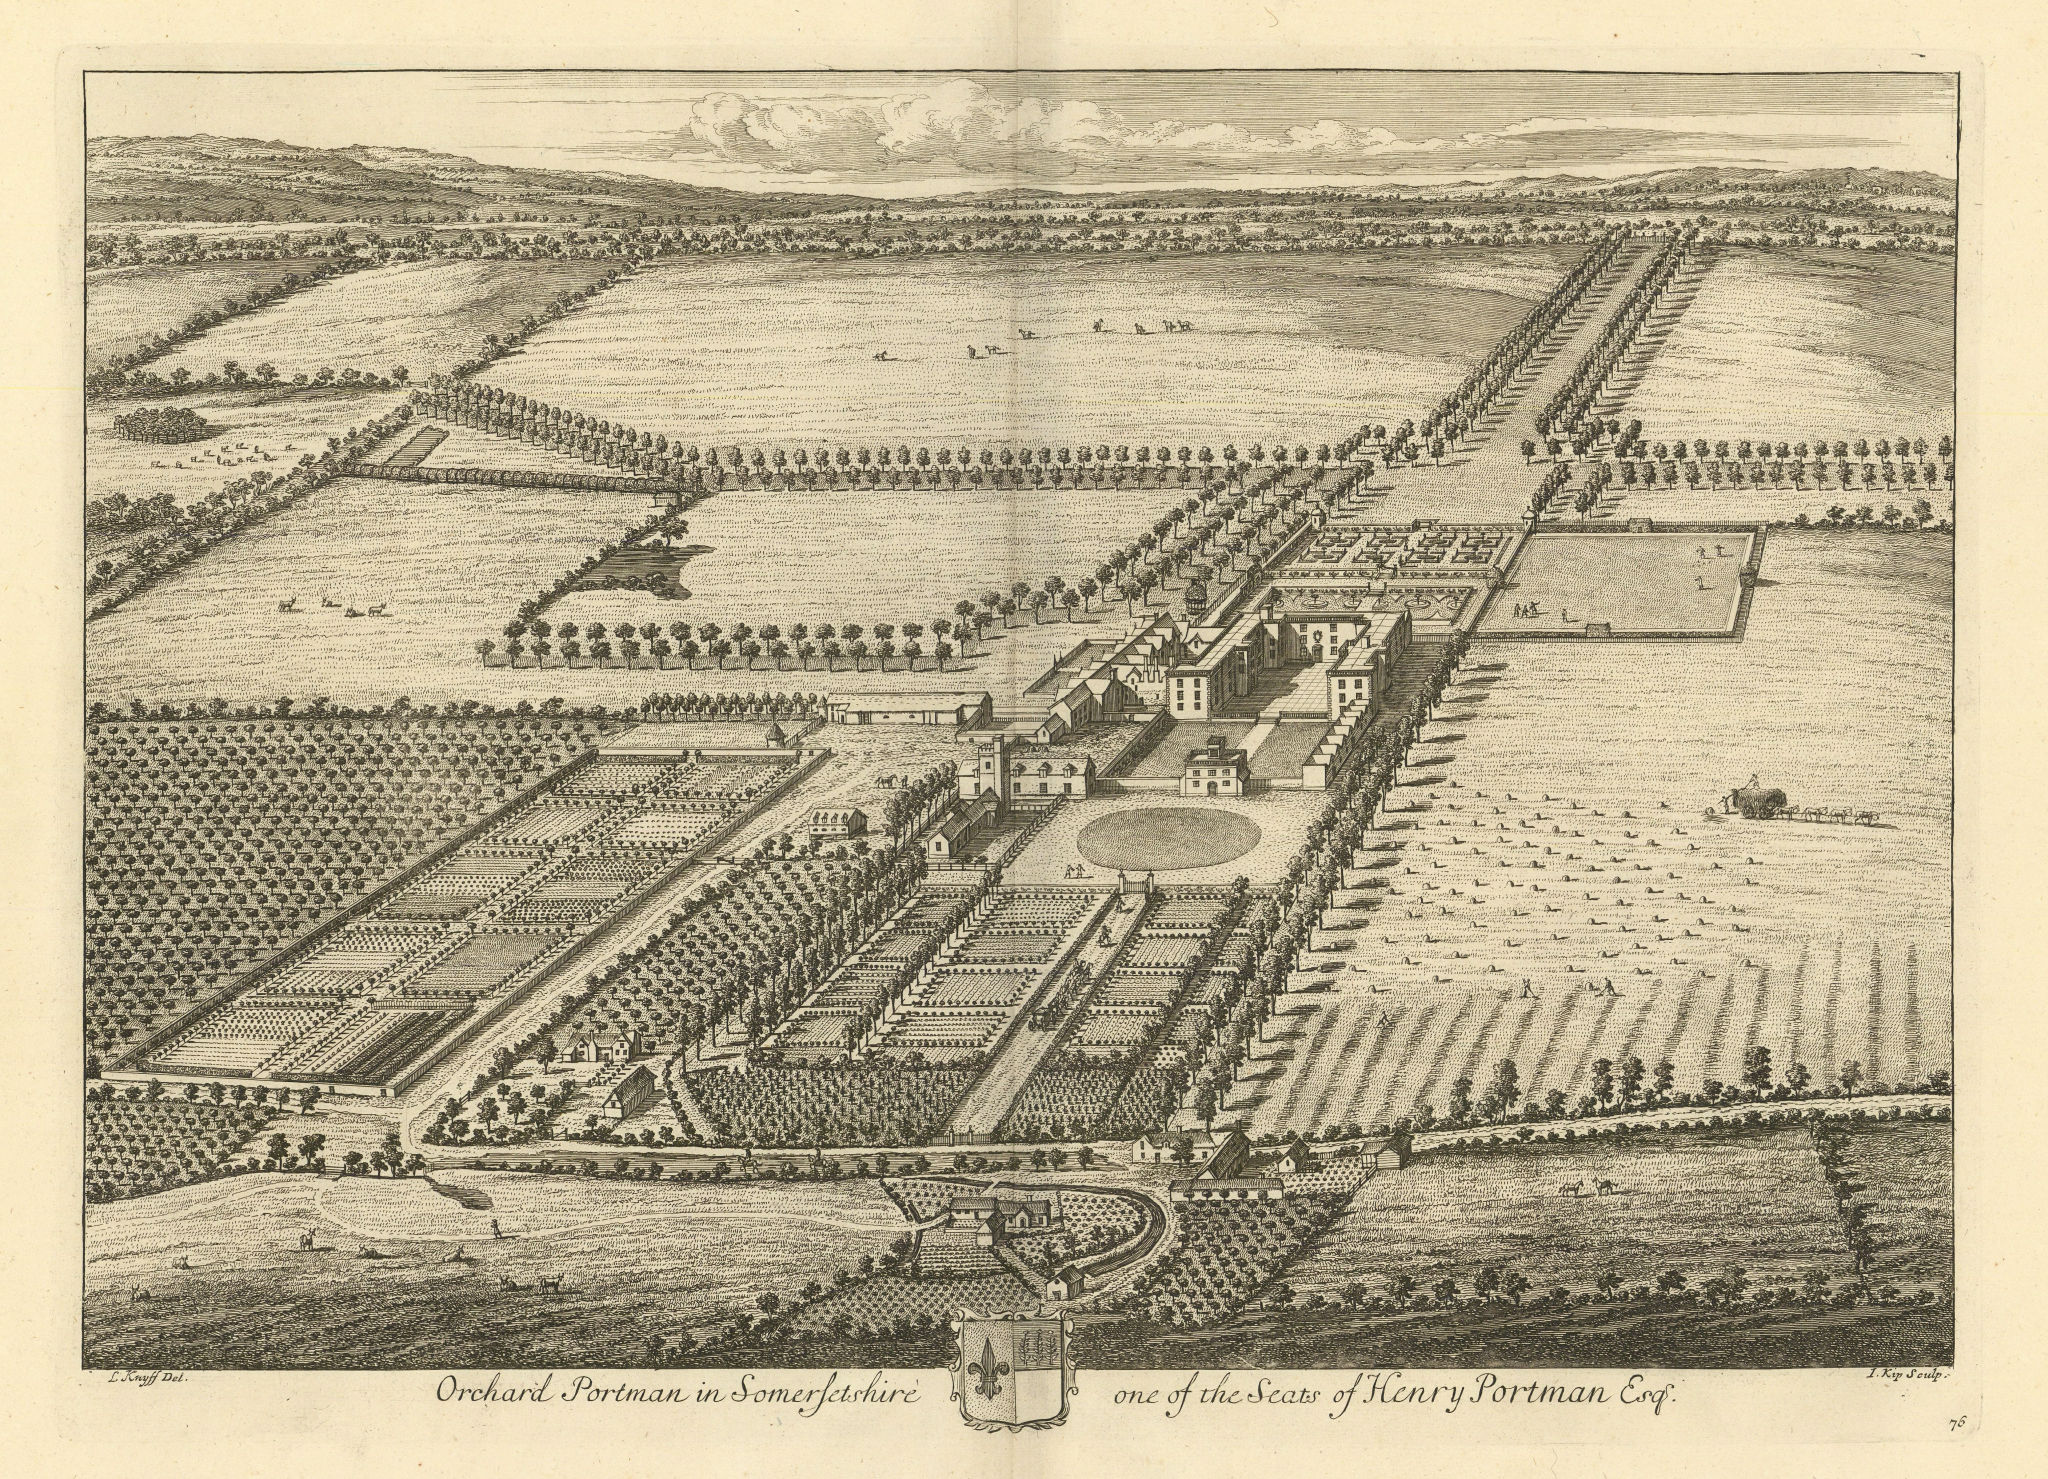 Associate Product "Orchard Portman in Somersetshire" by Kip & Knyff. Now Taunton Racecourse 1709